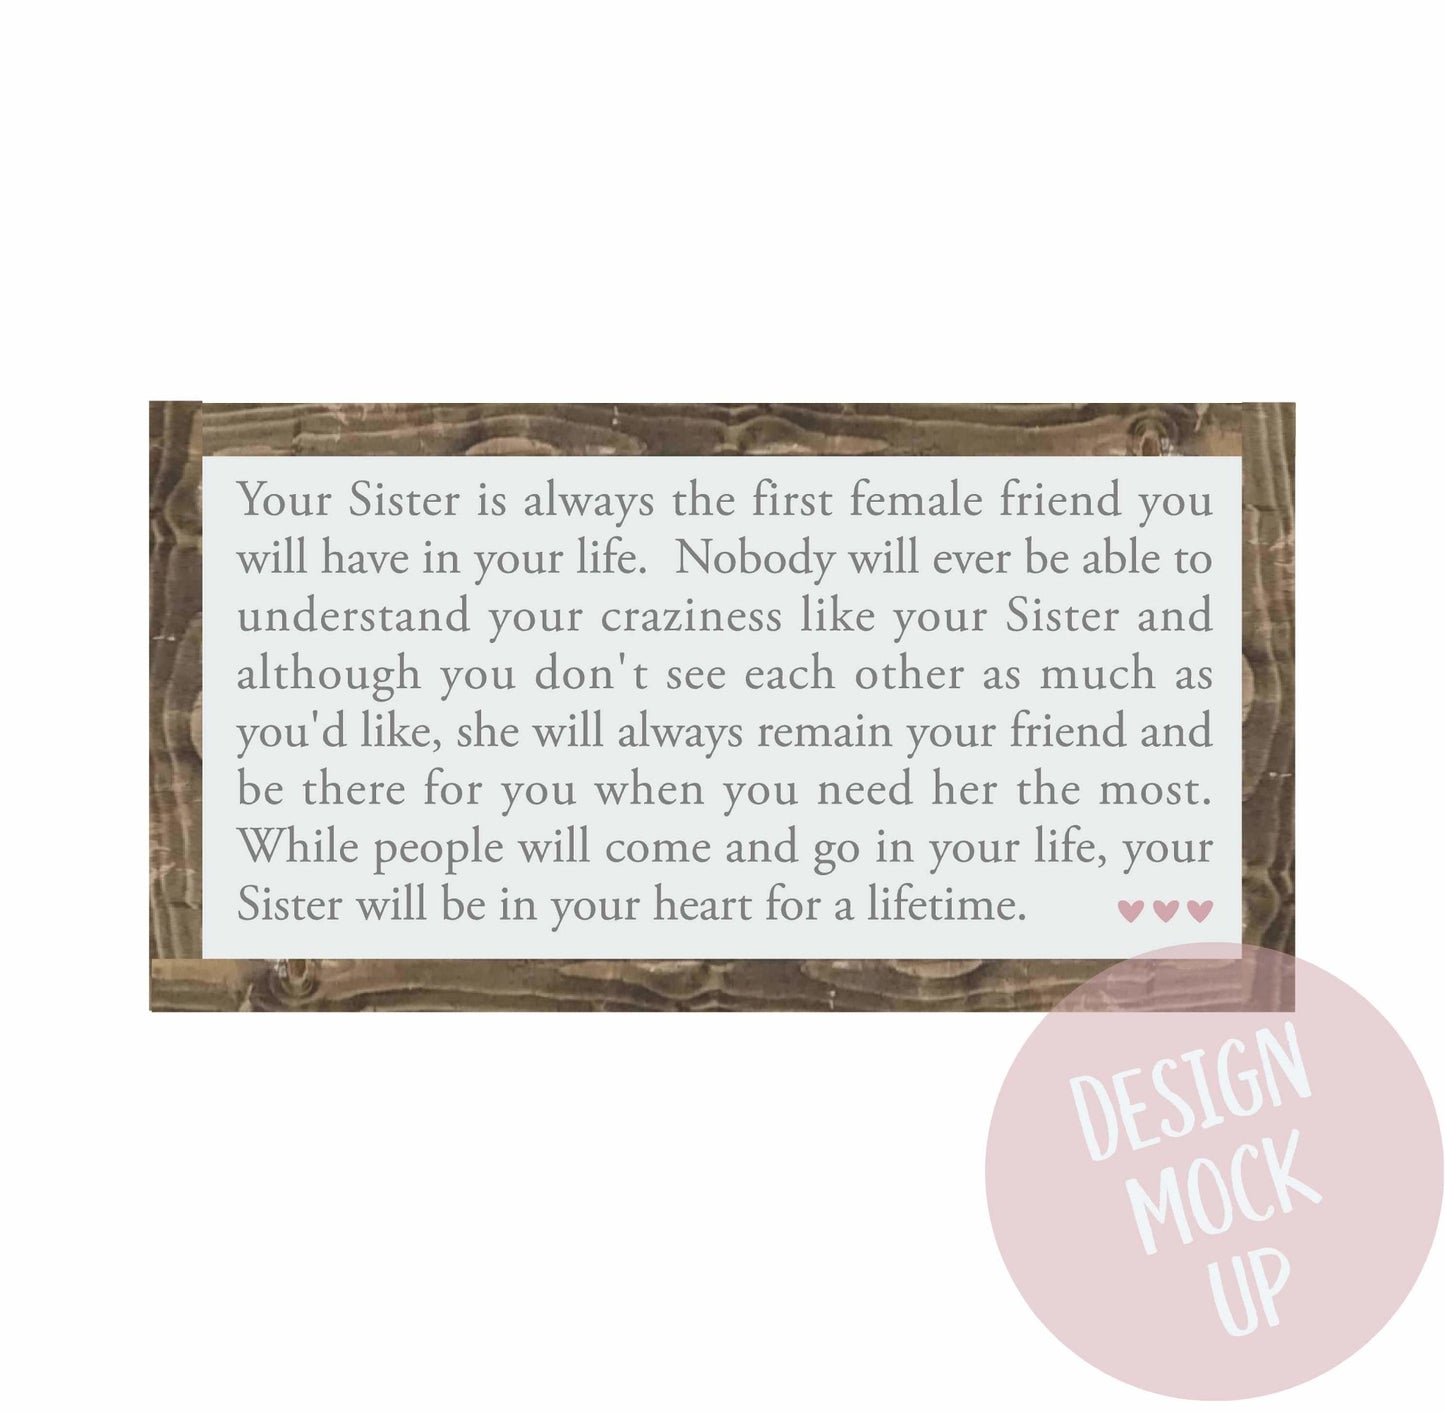 Sister | Framed Wood Sign - The Imperfect Wood Company - Framed Wood Sign